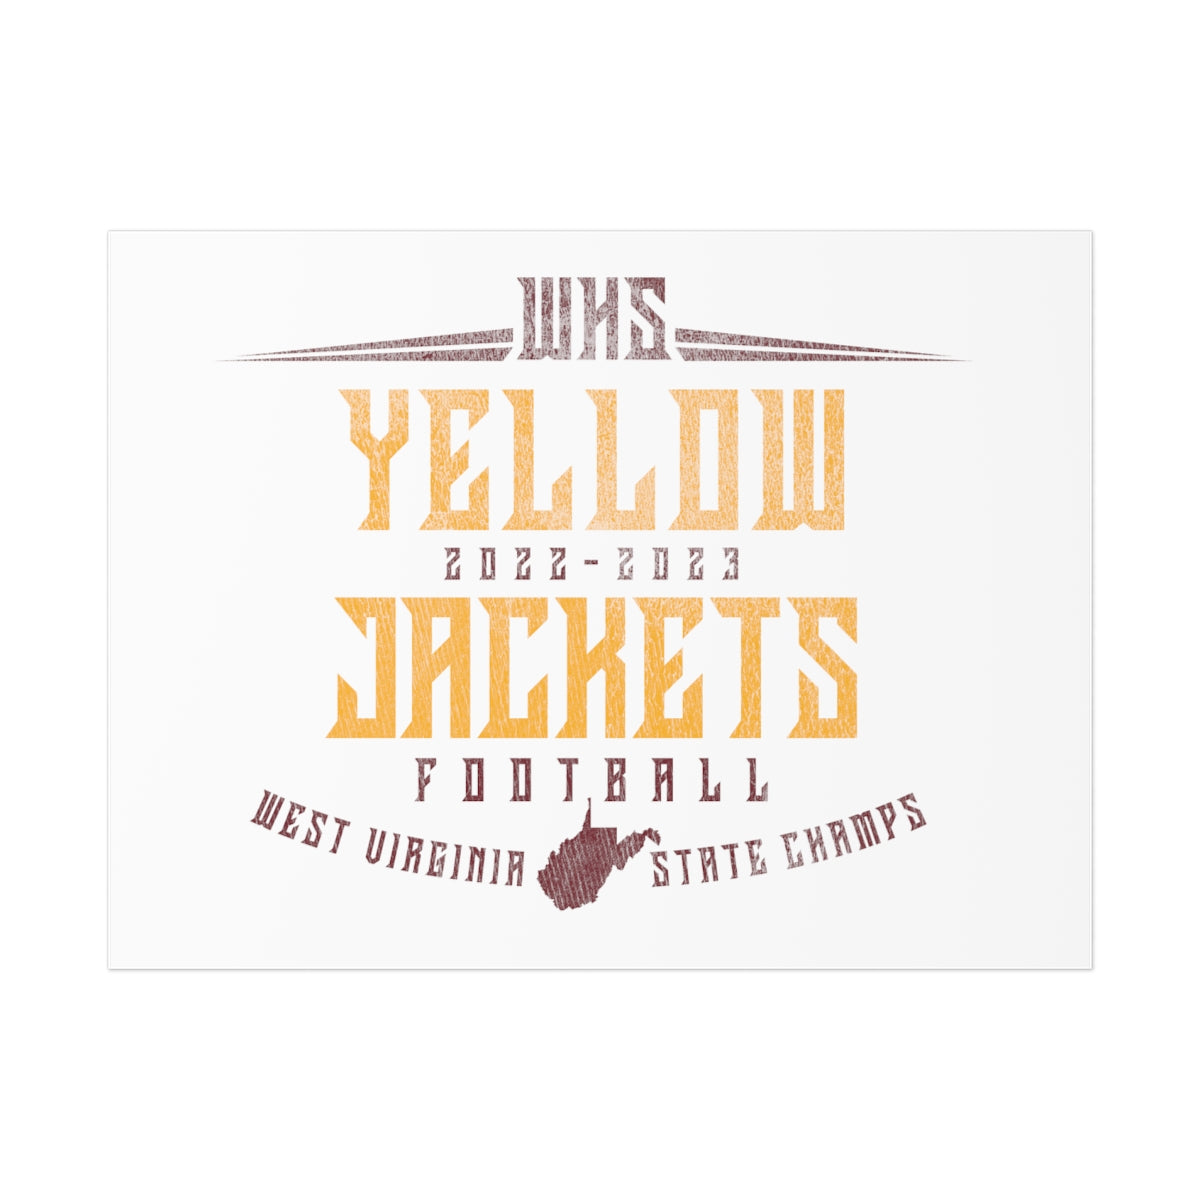 WHS YELLOW JACKETS 2022-2023 STATE CHAMPS-Distressed-24x18-Uncoated Posters